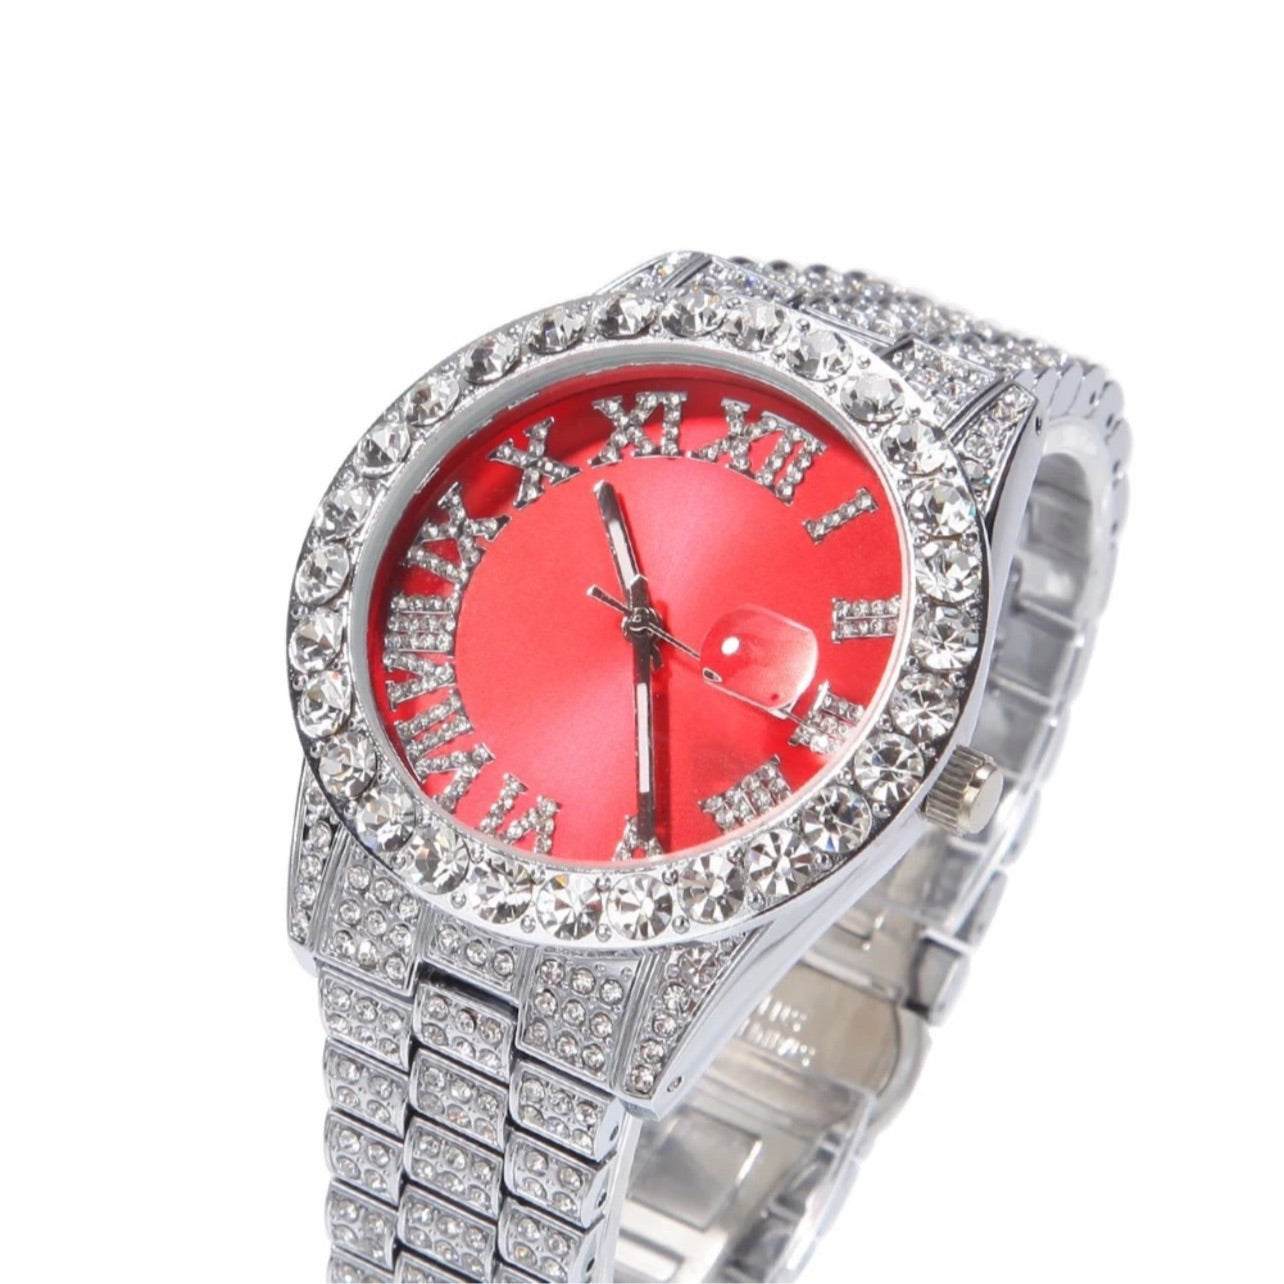 Exotic Watch “Silver”